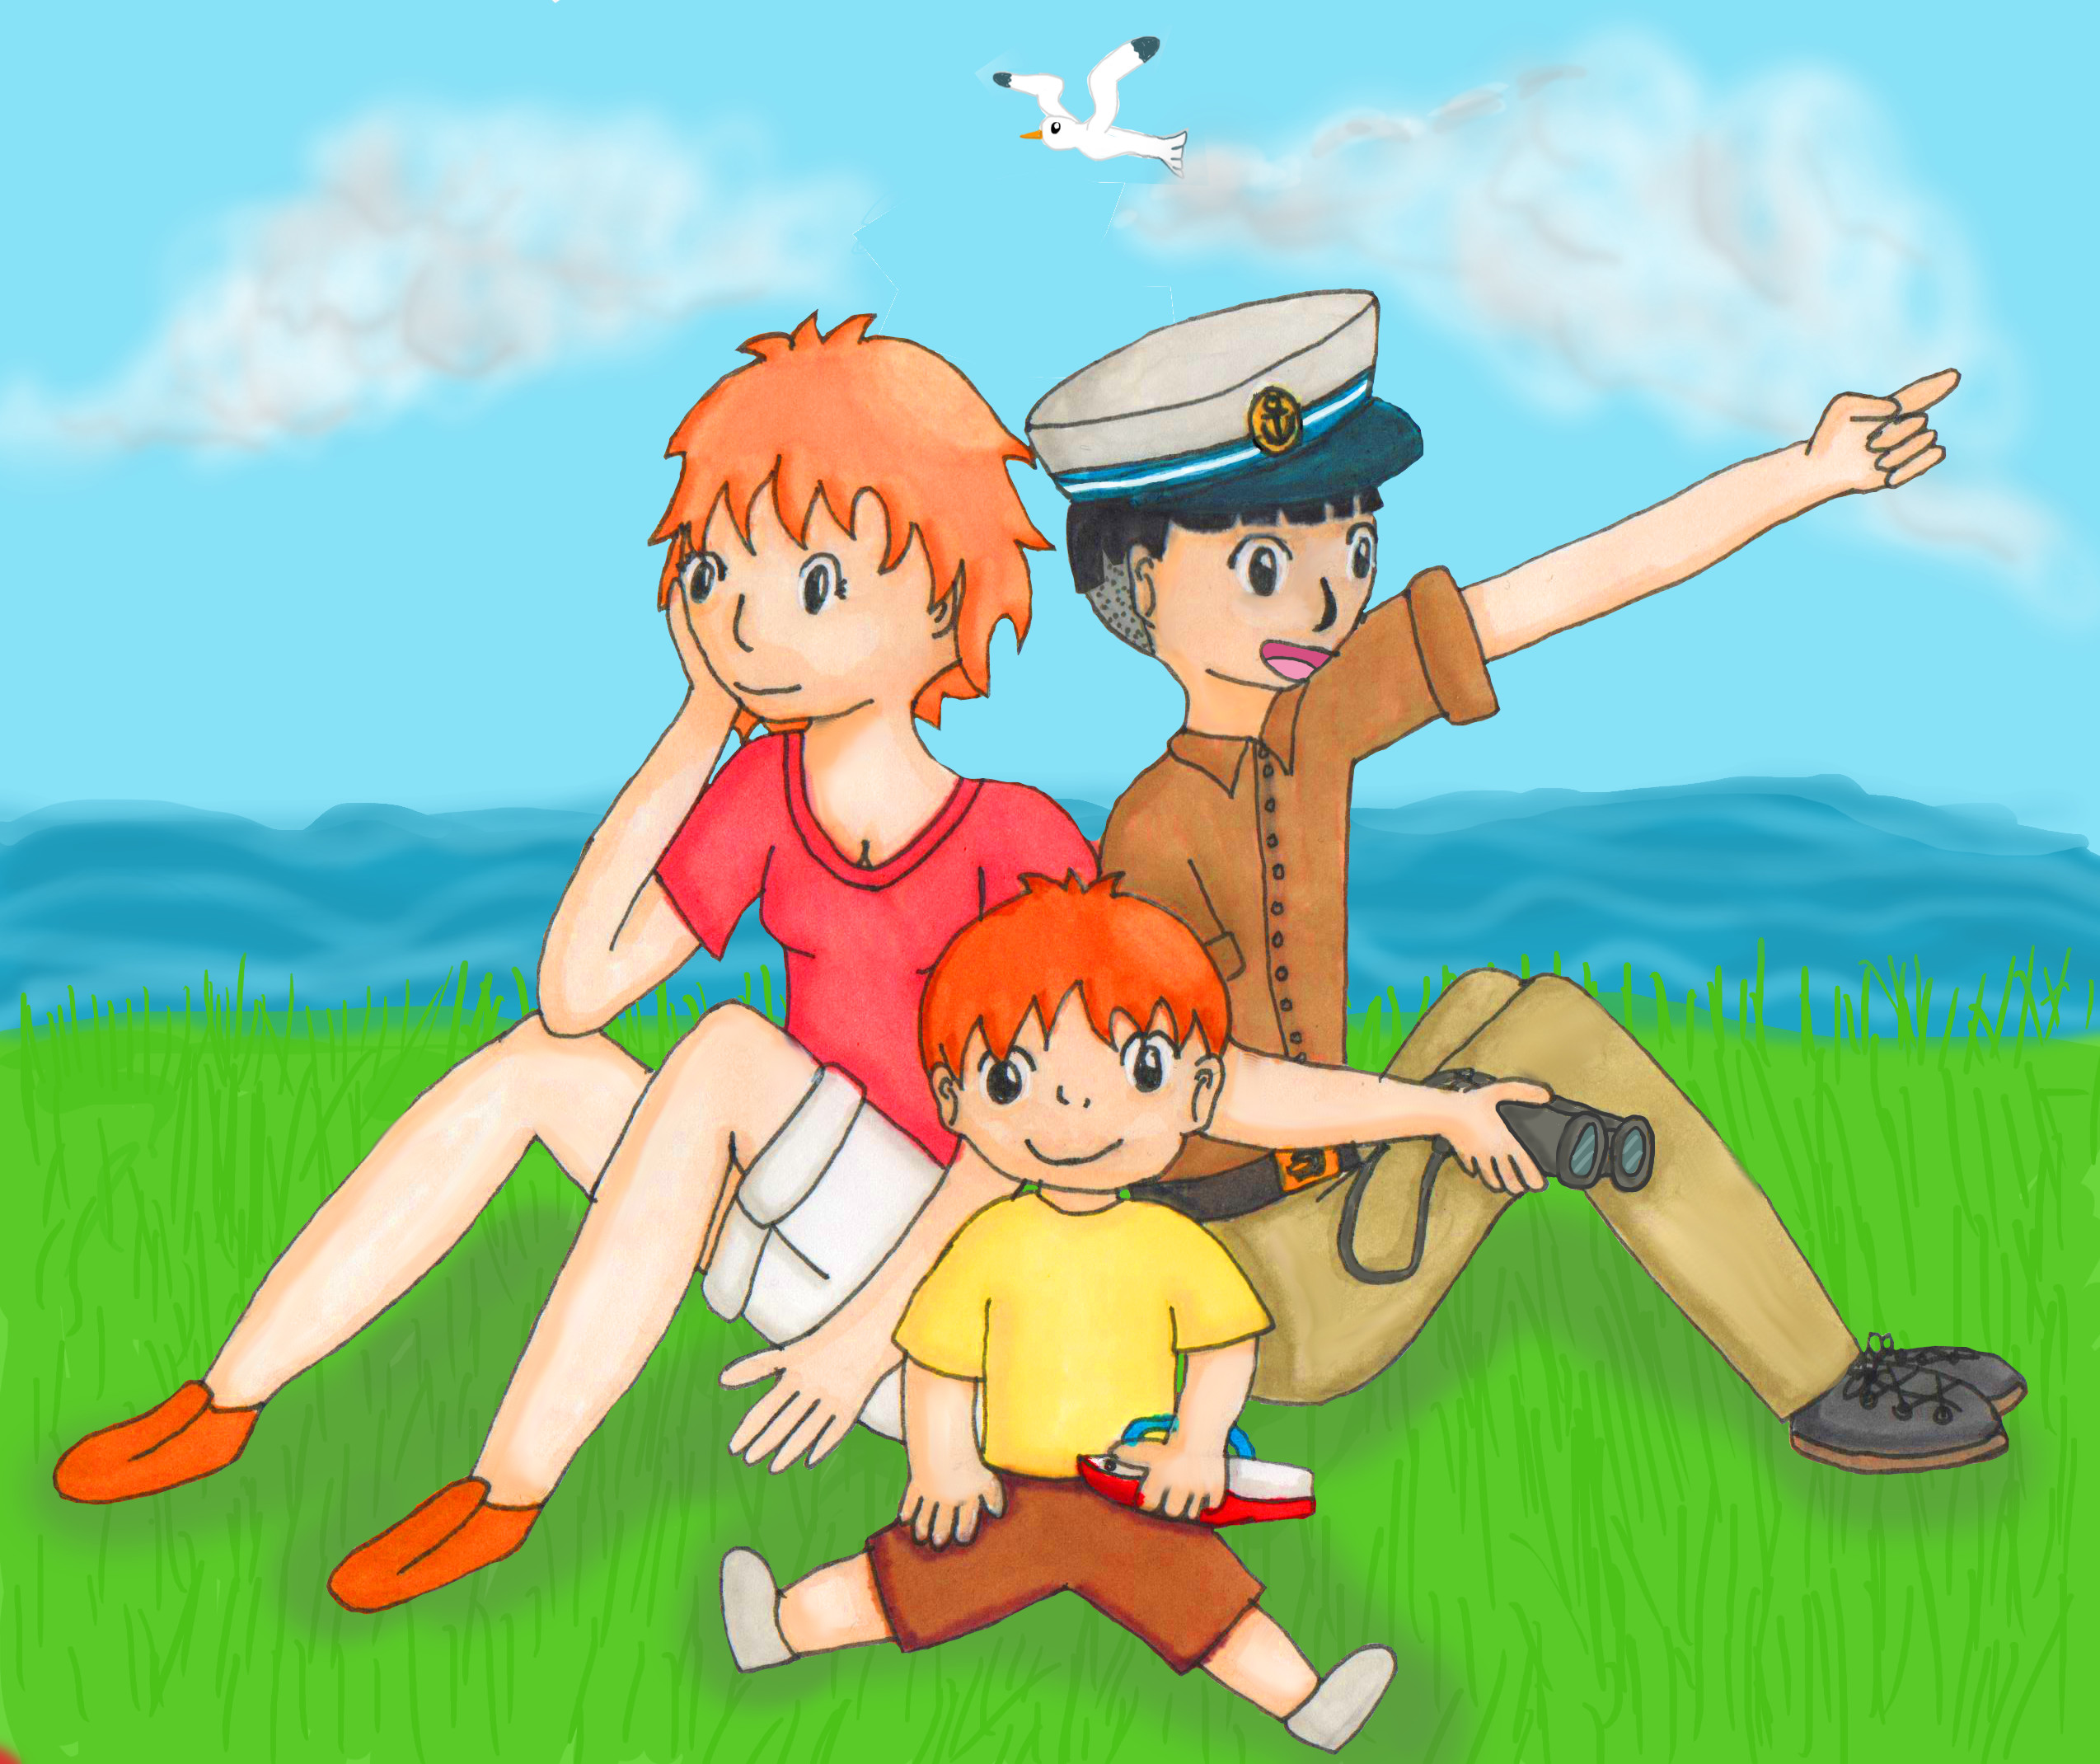 Sosuke and Ponyo (older) by Death-of-all.